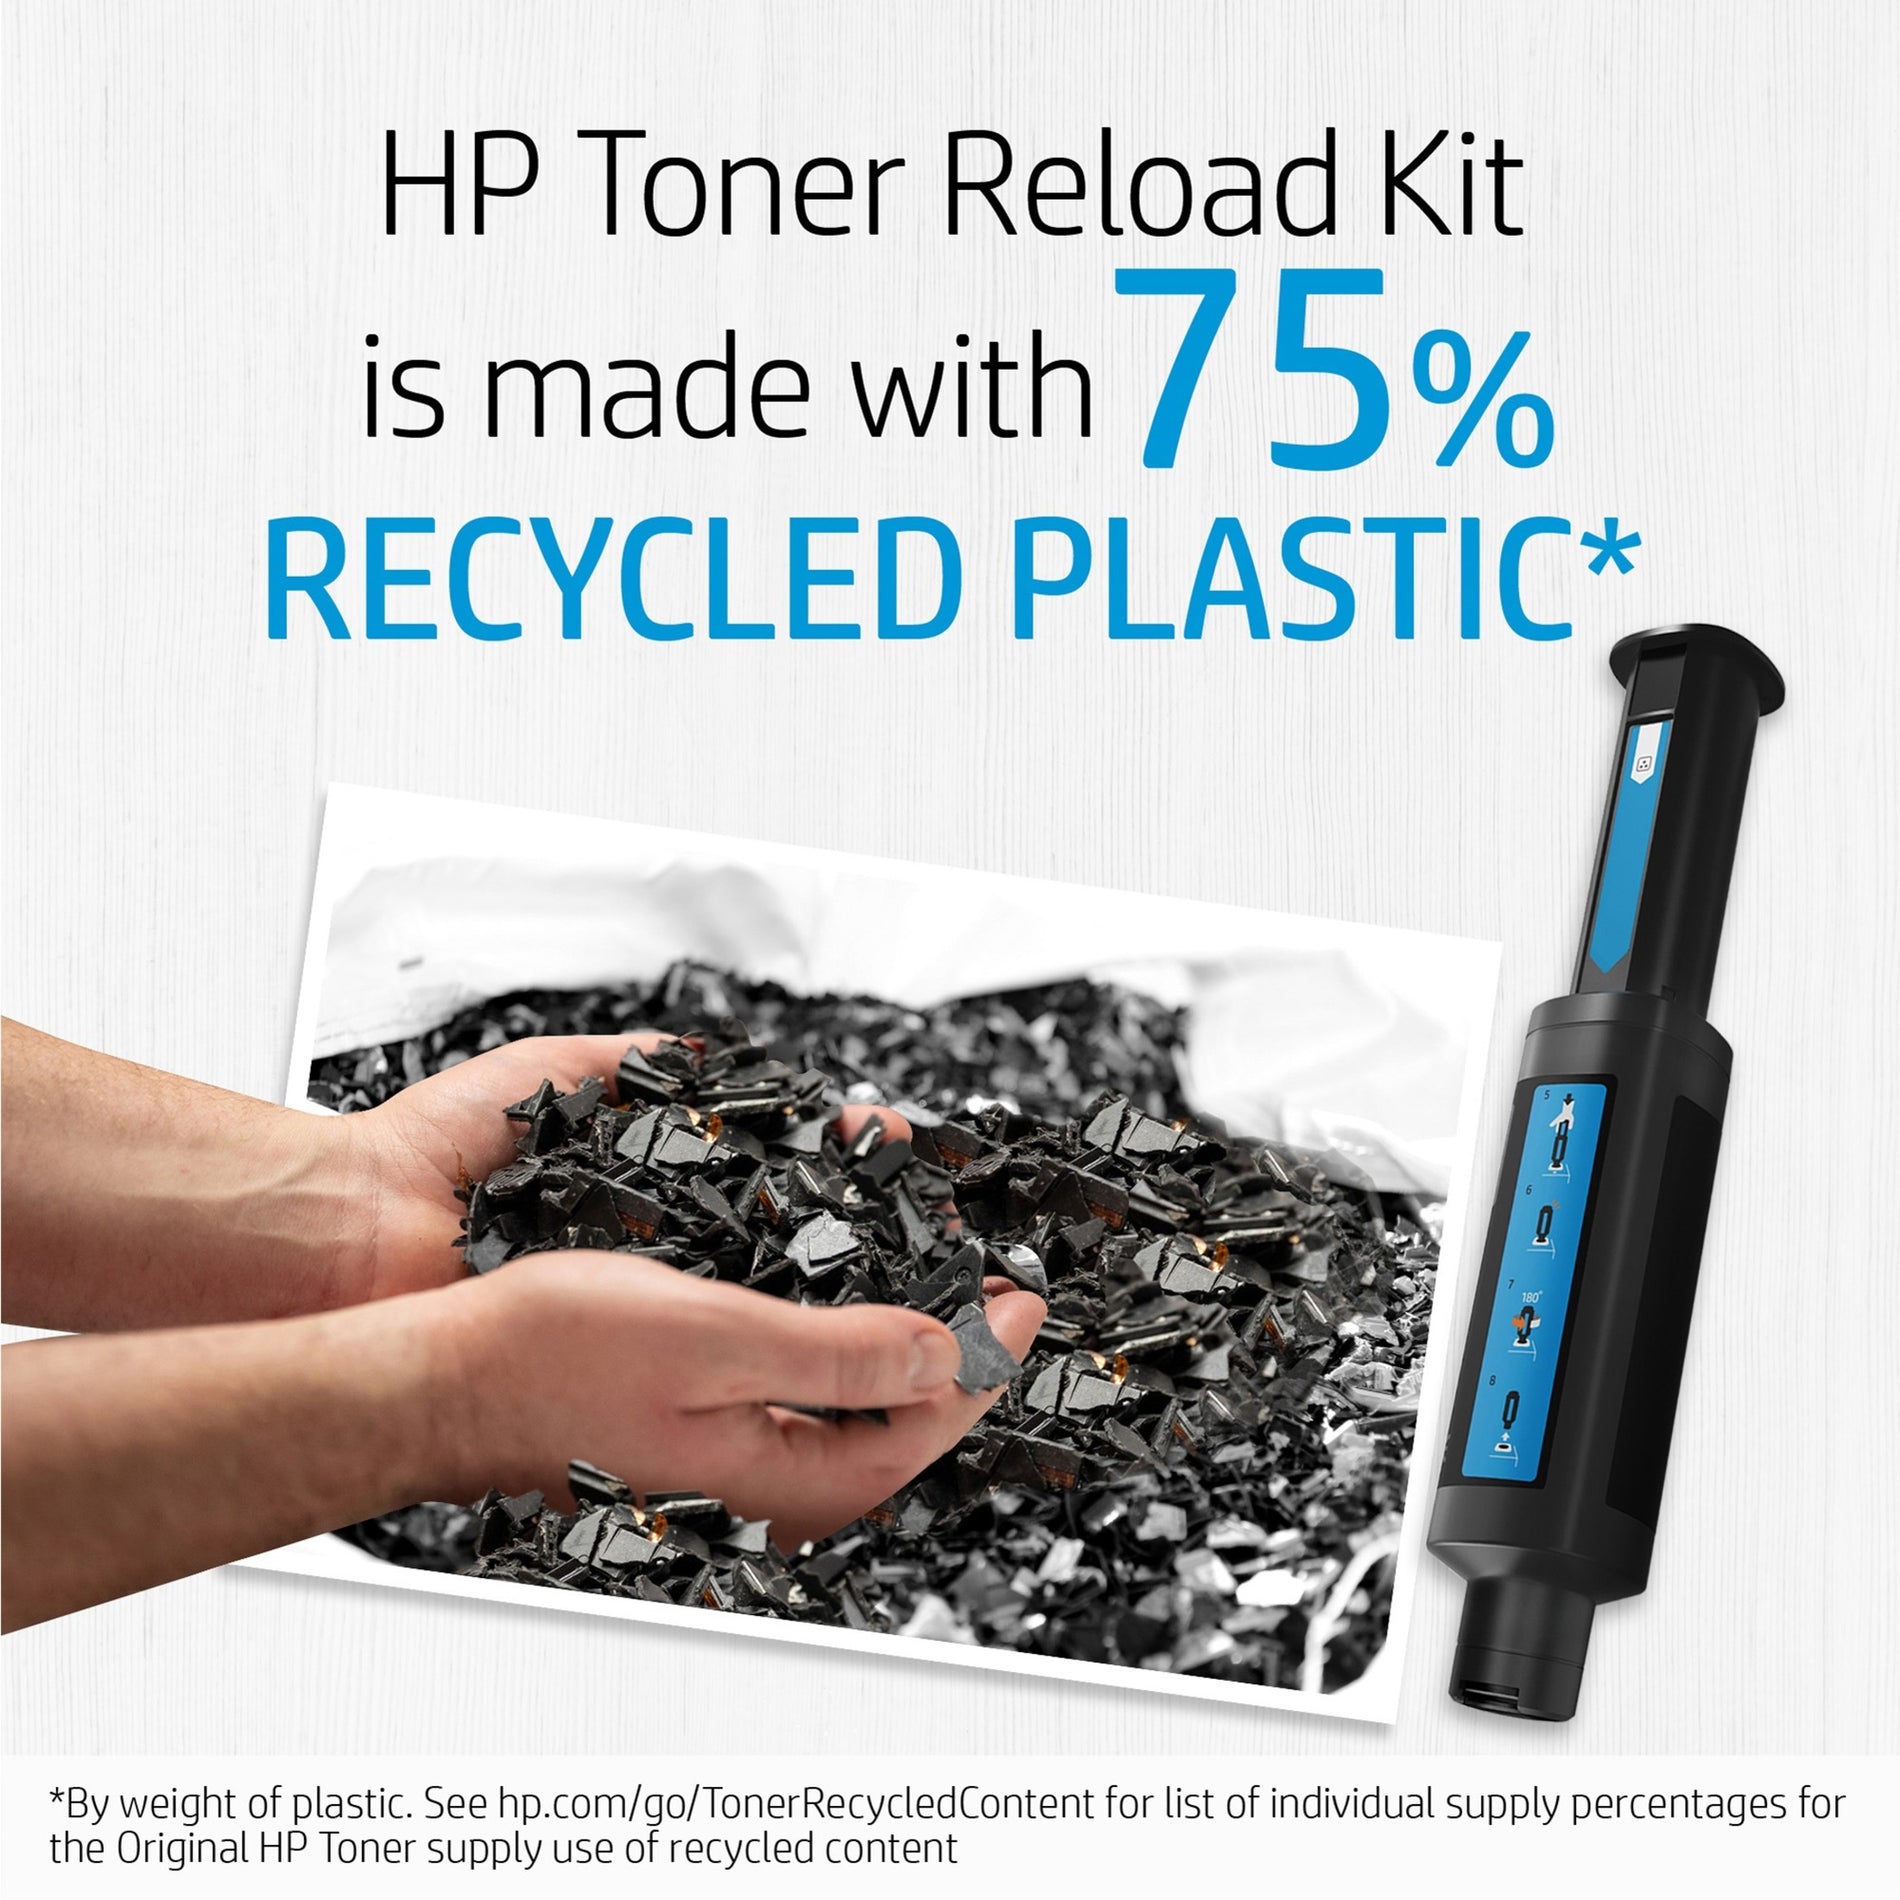 HP CF210A 131A Toner Cartridge, Black - 1600 Pages Yield